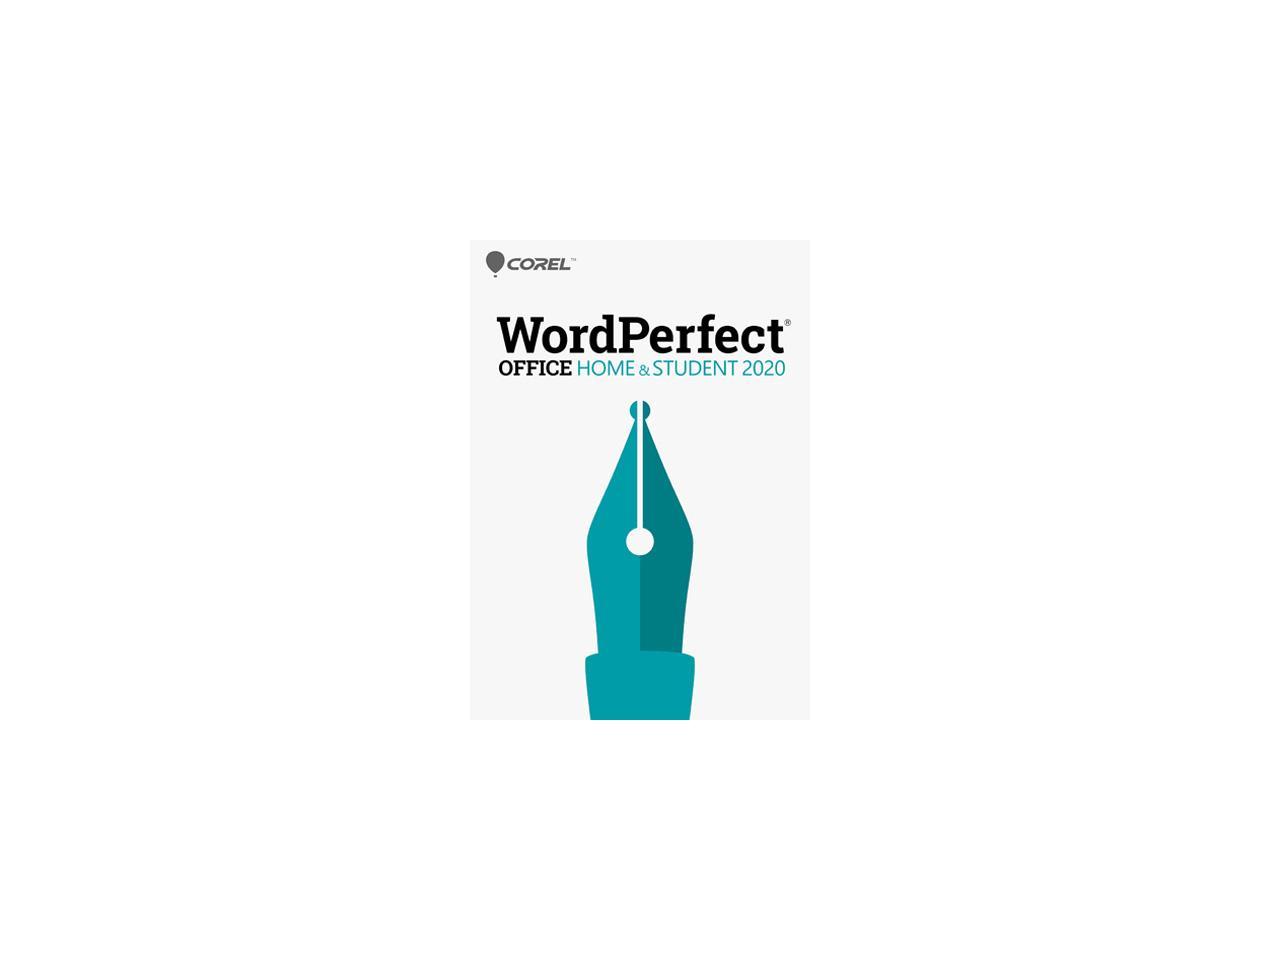 wordperfect office home & student 2020